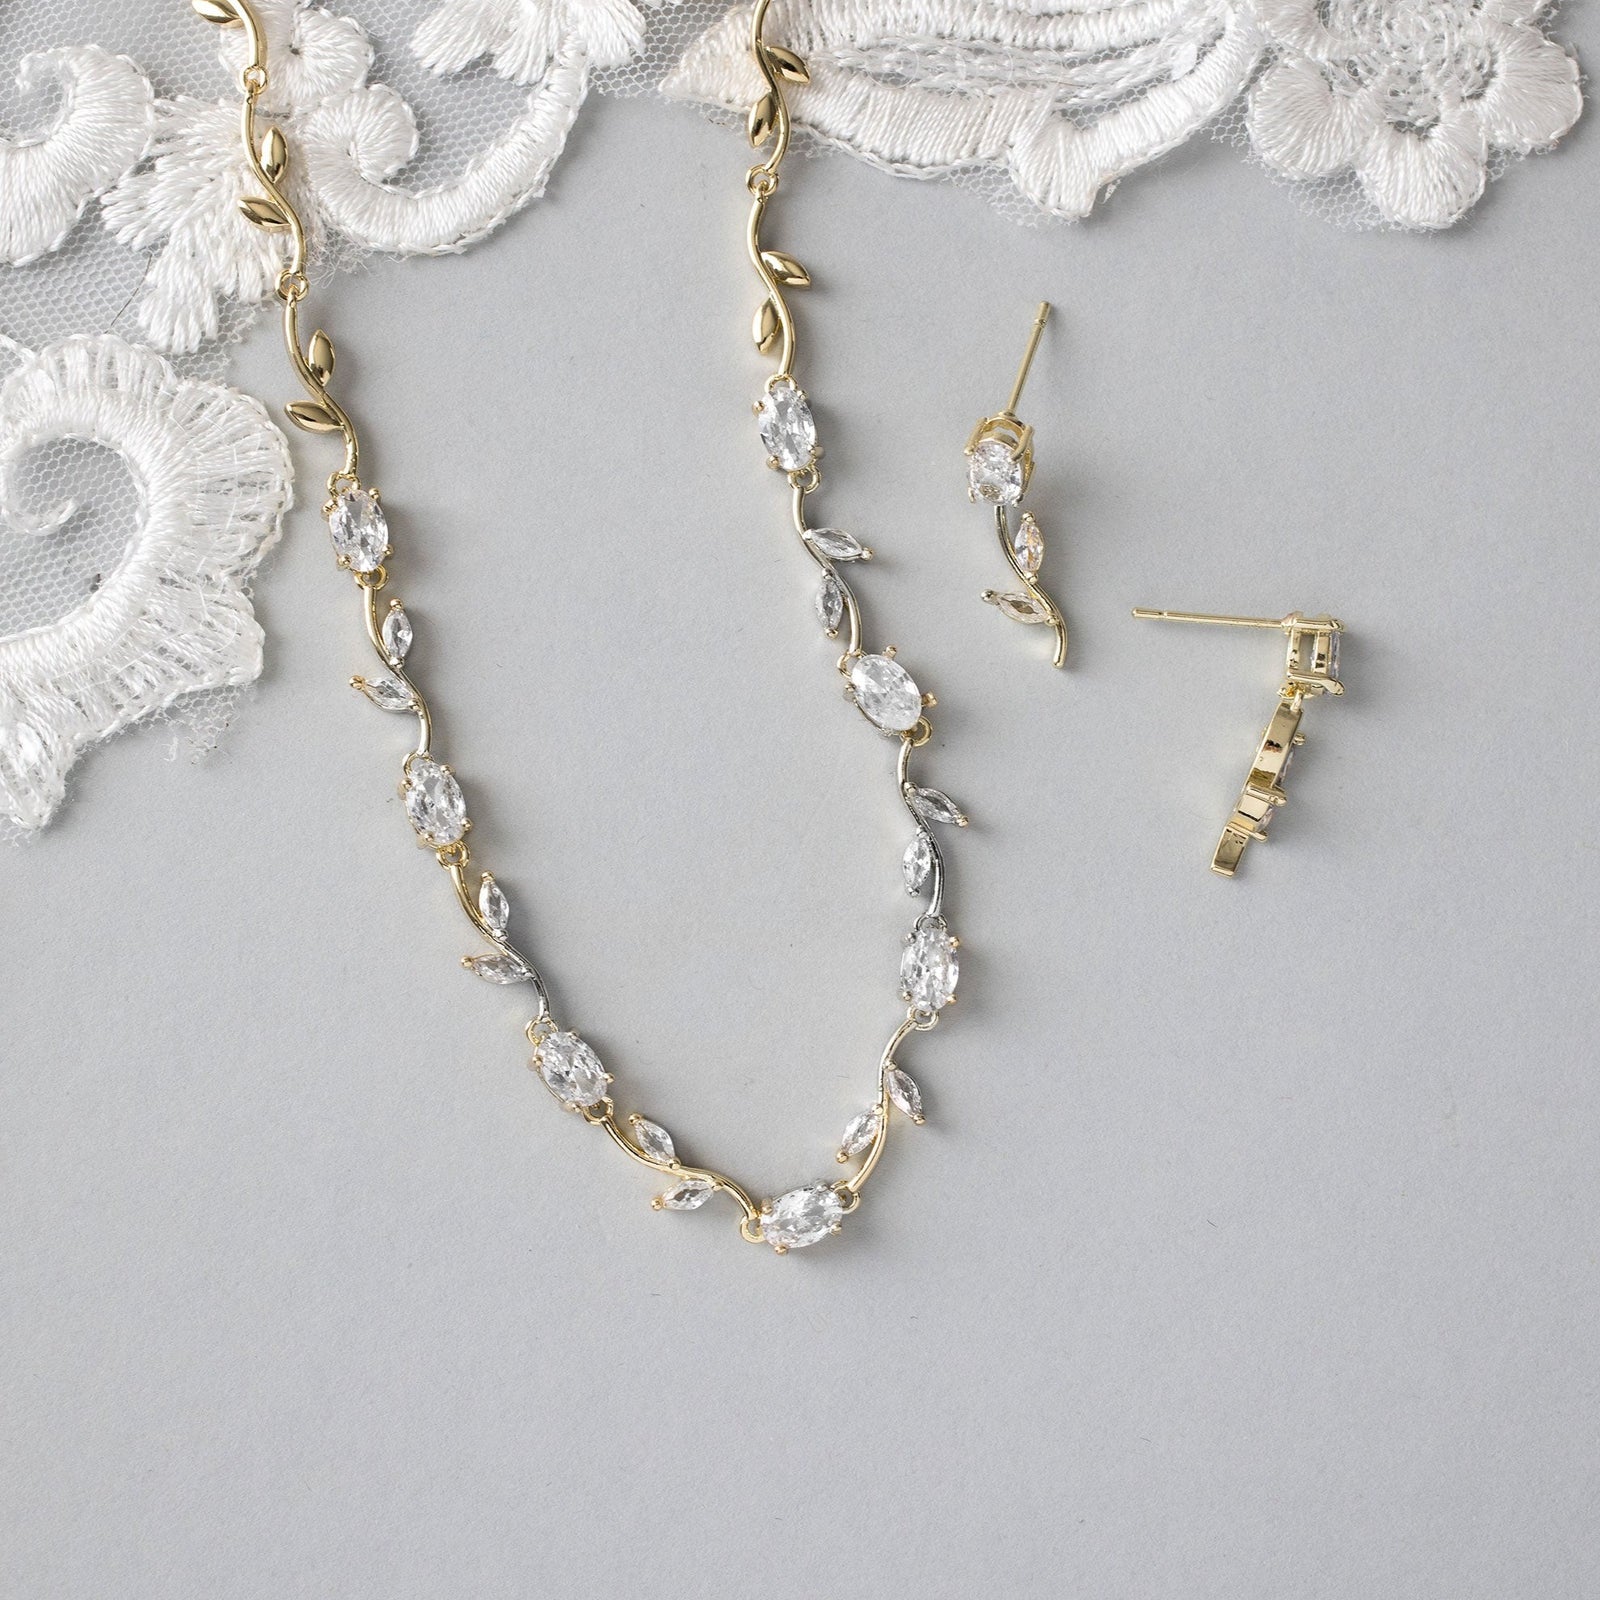 Bridal Necklace and Earrings Oval Vine Design